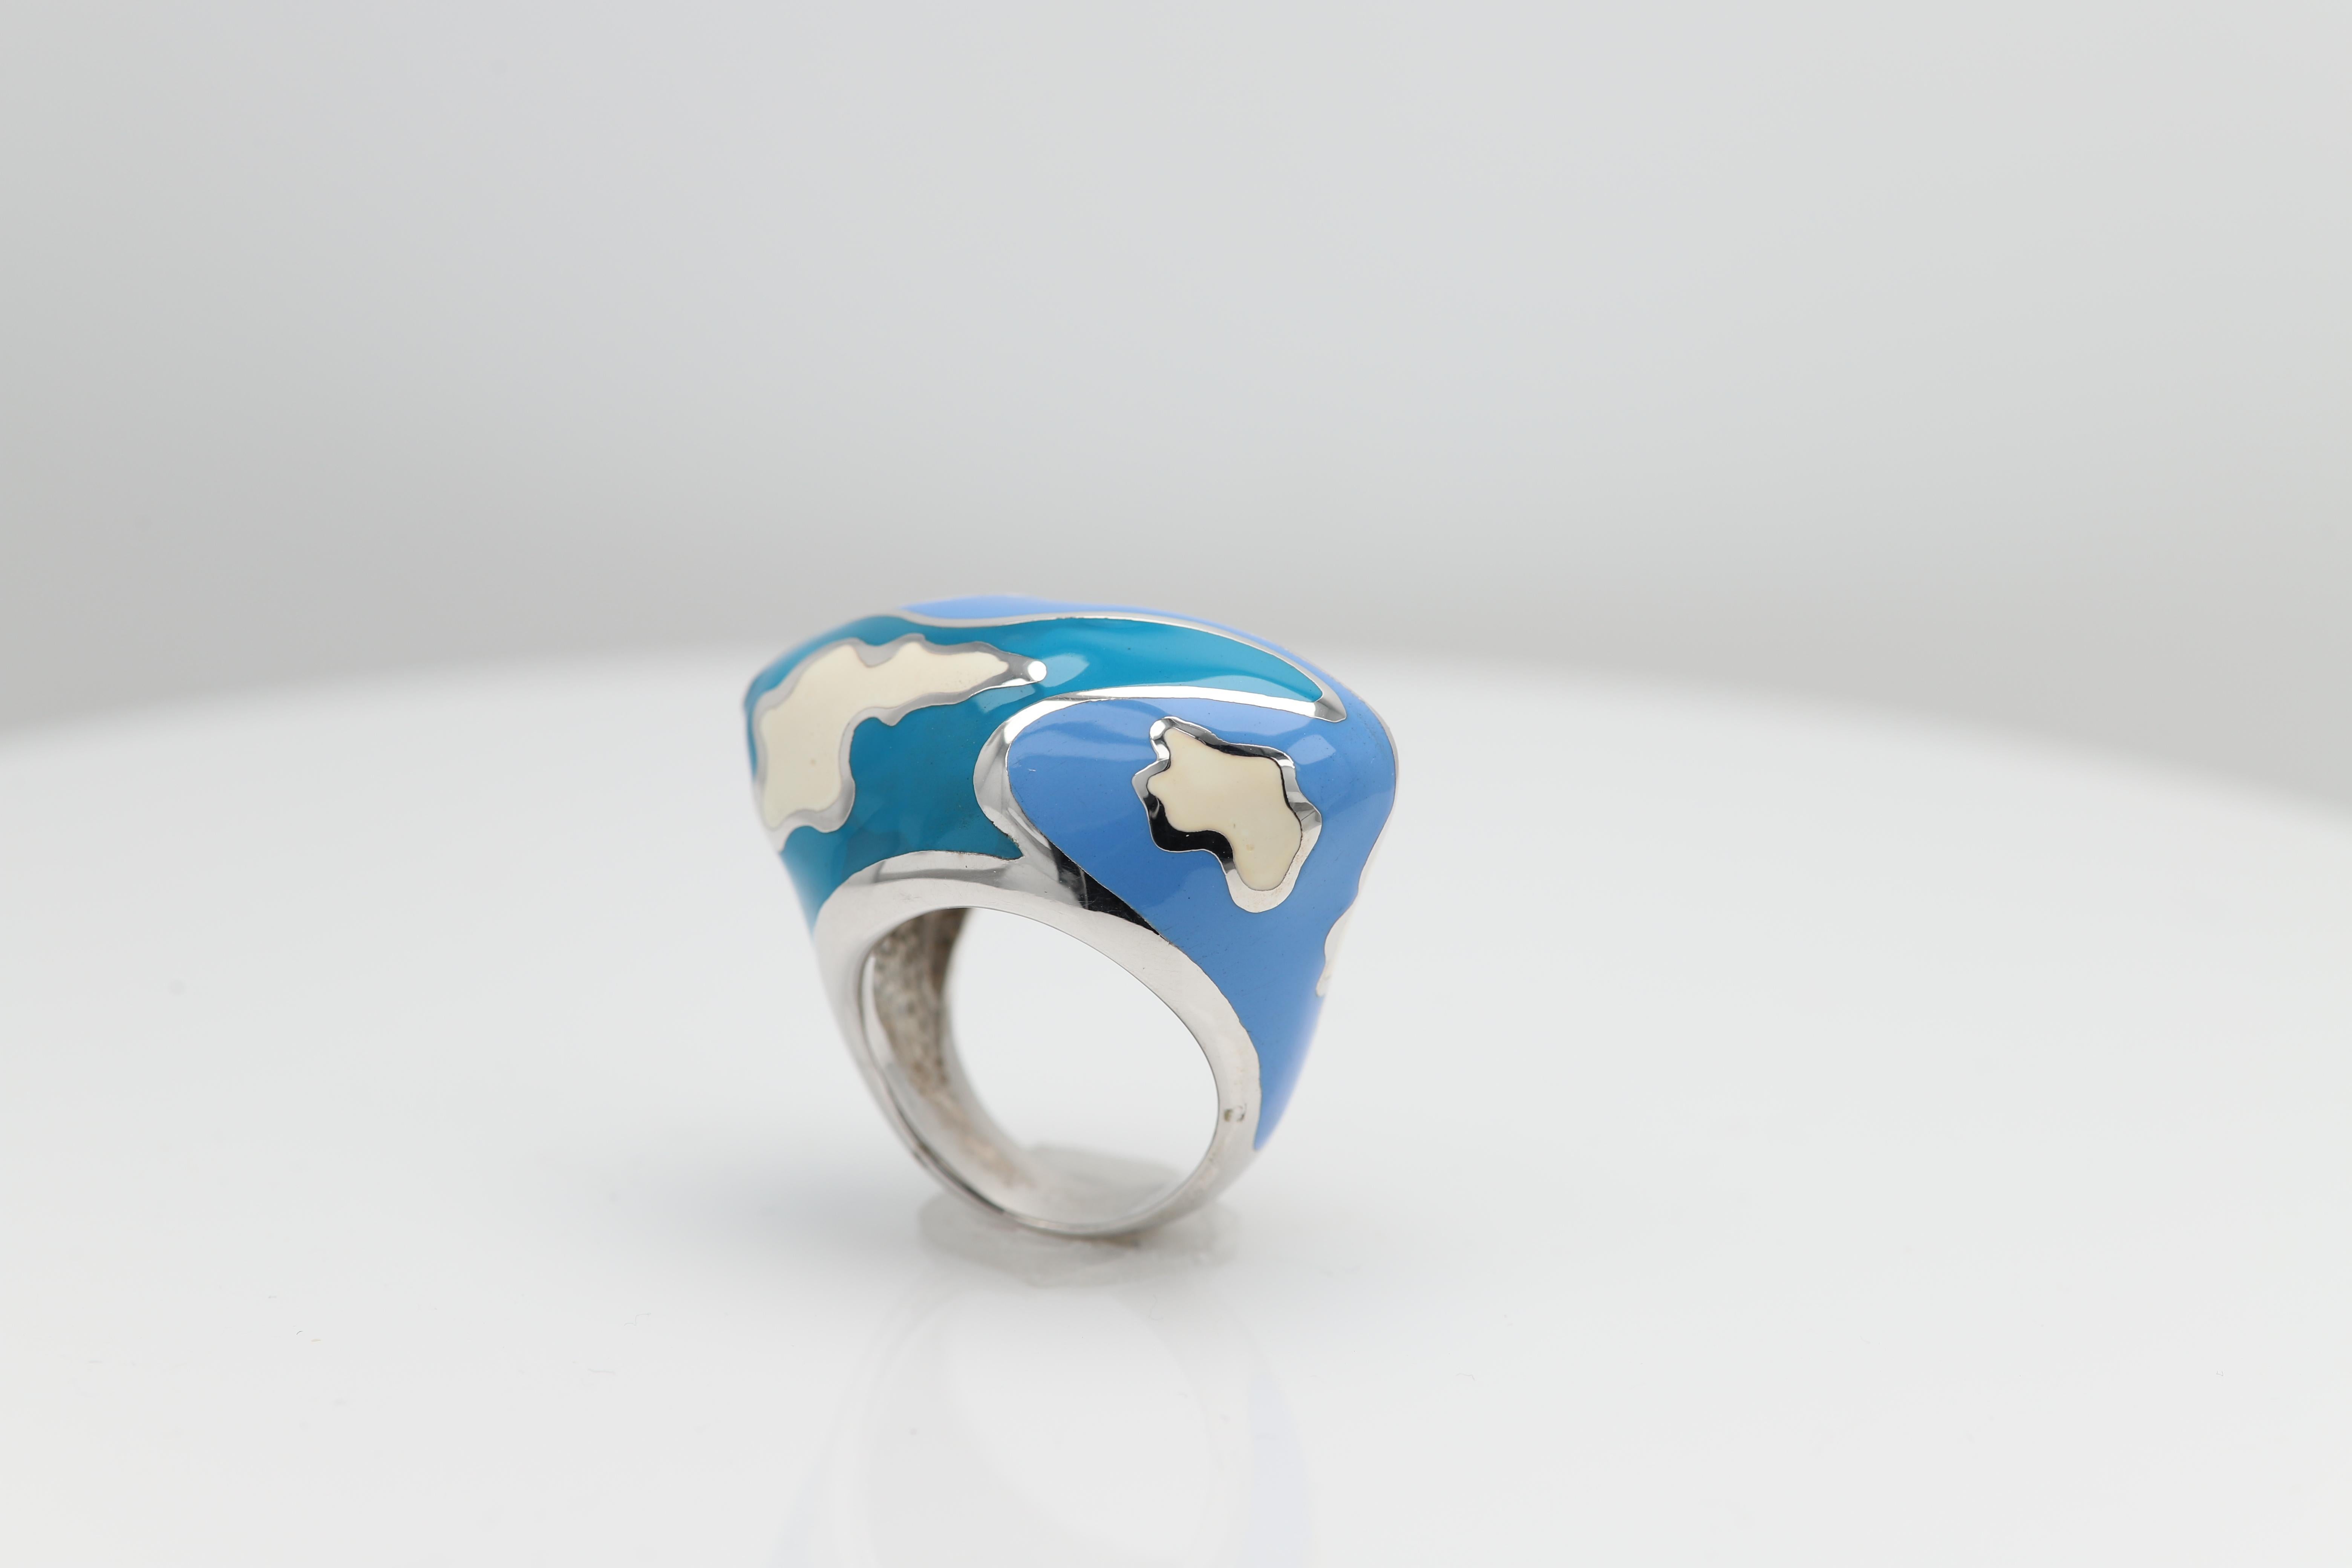 Enamel Artistic Art Ring Inspired by famous world artist sterling silver 925, hand made in Italy, finger size 7  (NOT RESIZABLE) . Approx design area size:  34 x 20 mm (1.25' inch ) diameter(1' inch), Slightly imperfections may exist due to